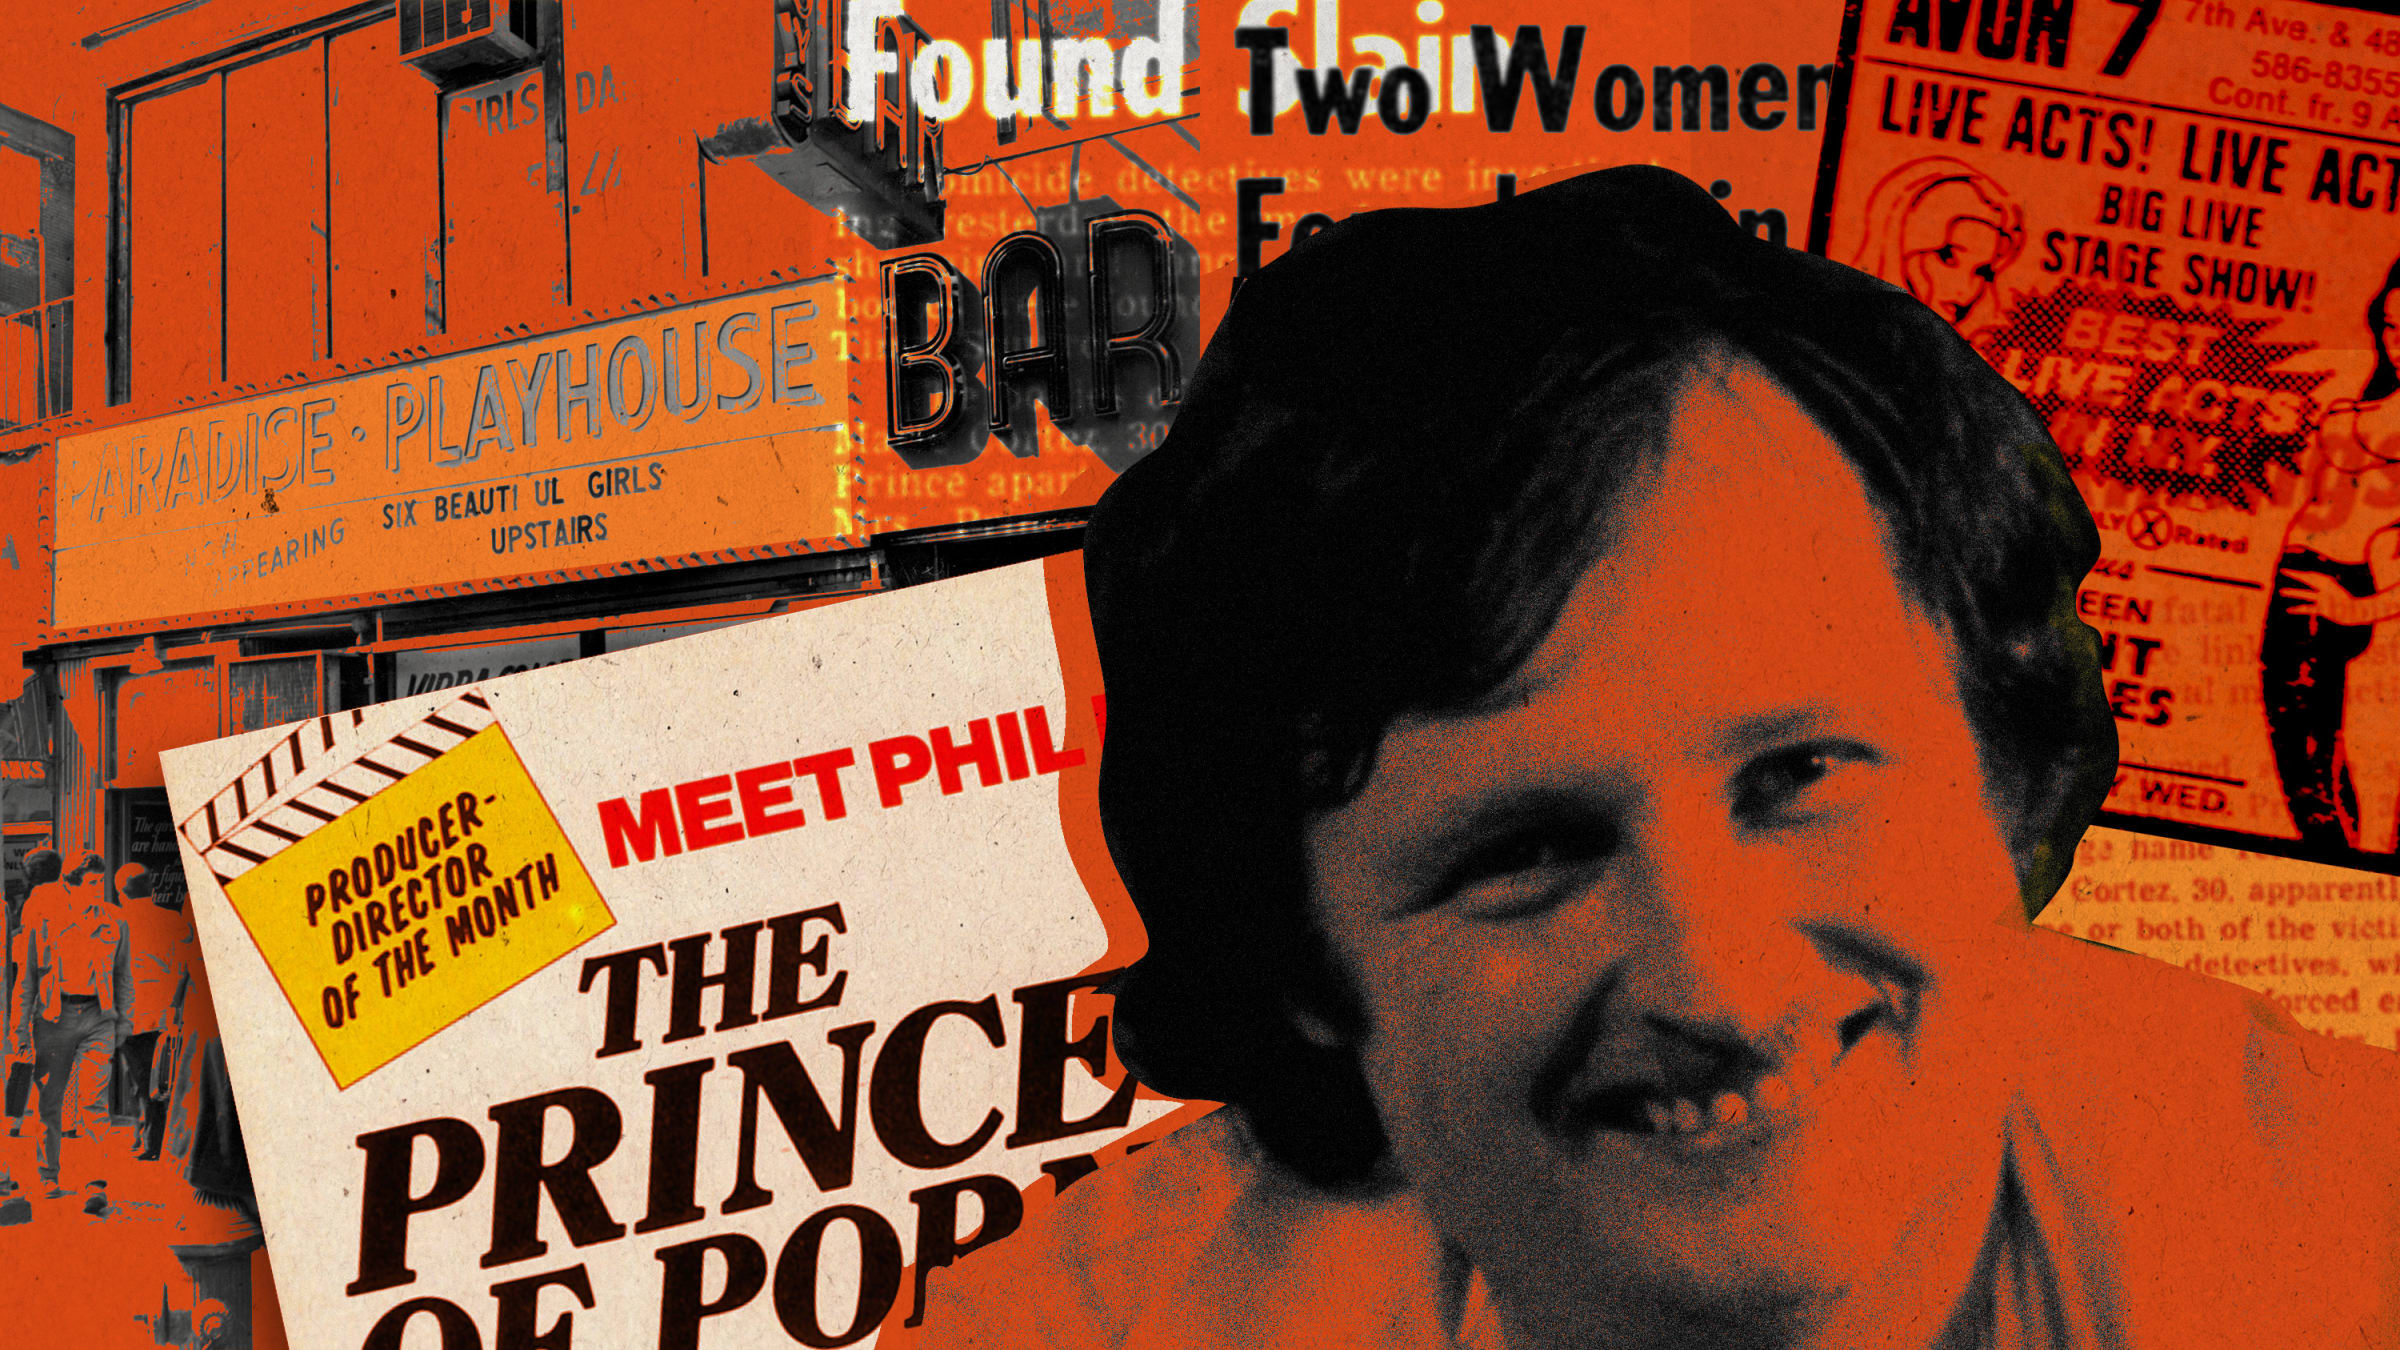 20year Girl Sex Pron - The Porn Prince of New York's Live Sex Shows in 1970s Times Square